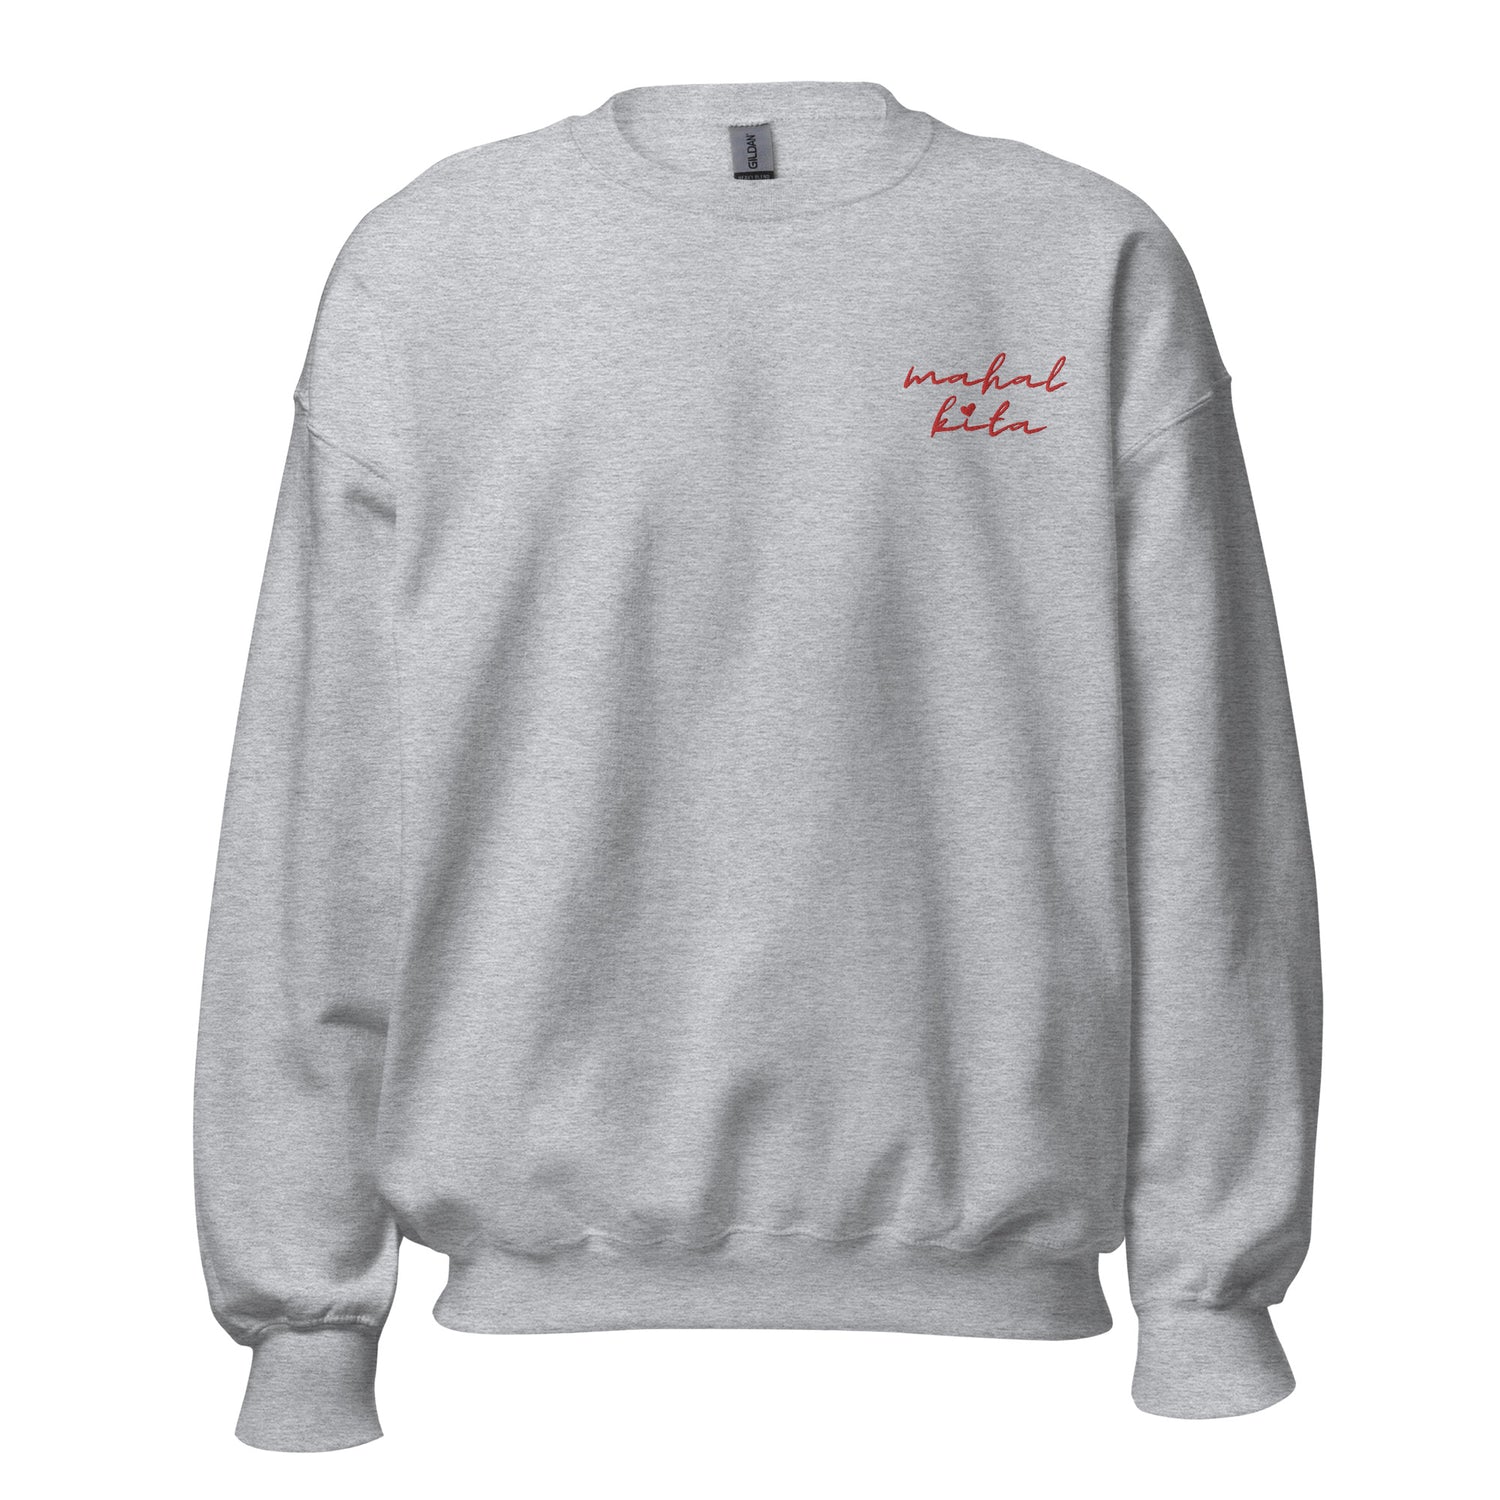 Filipino Sweatshirt Crew Neck Mahal Kita Love You Embroidered Valentine's Day Merch in color variant Sport Gray